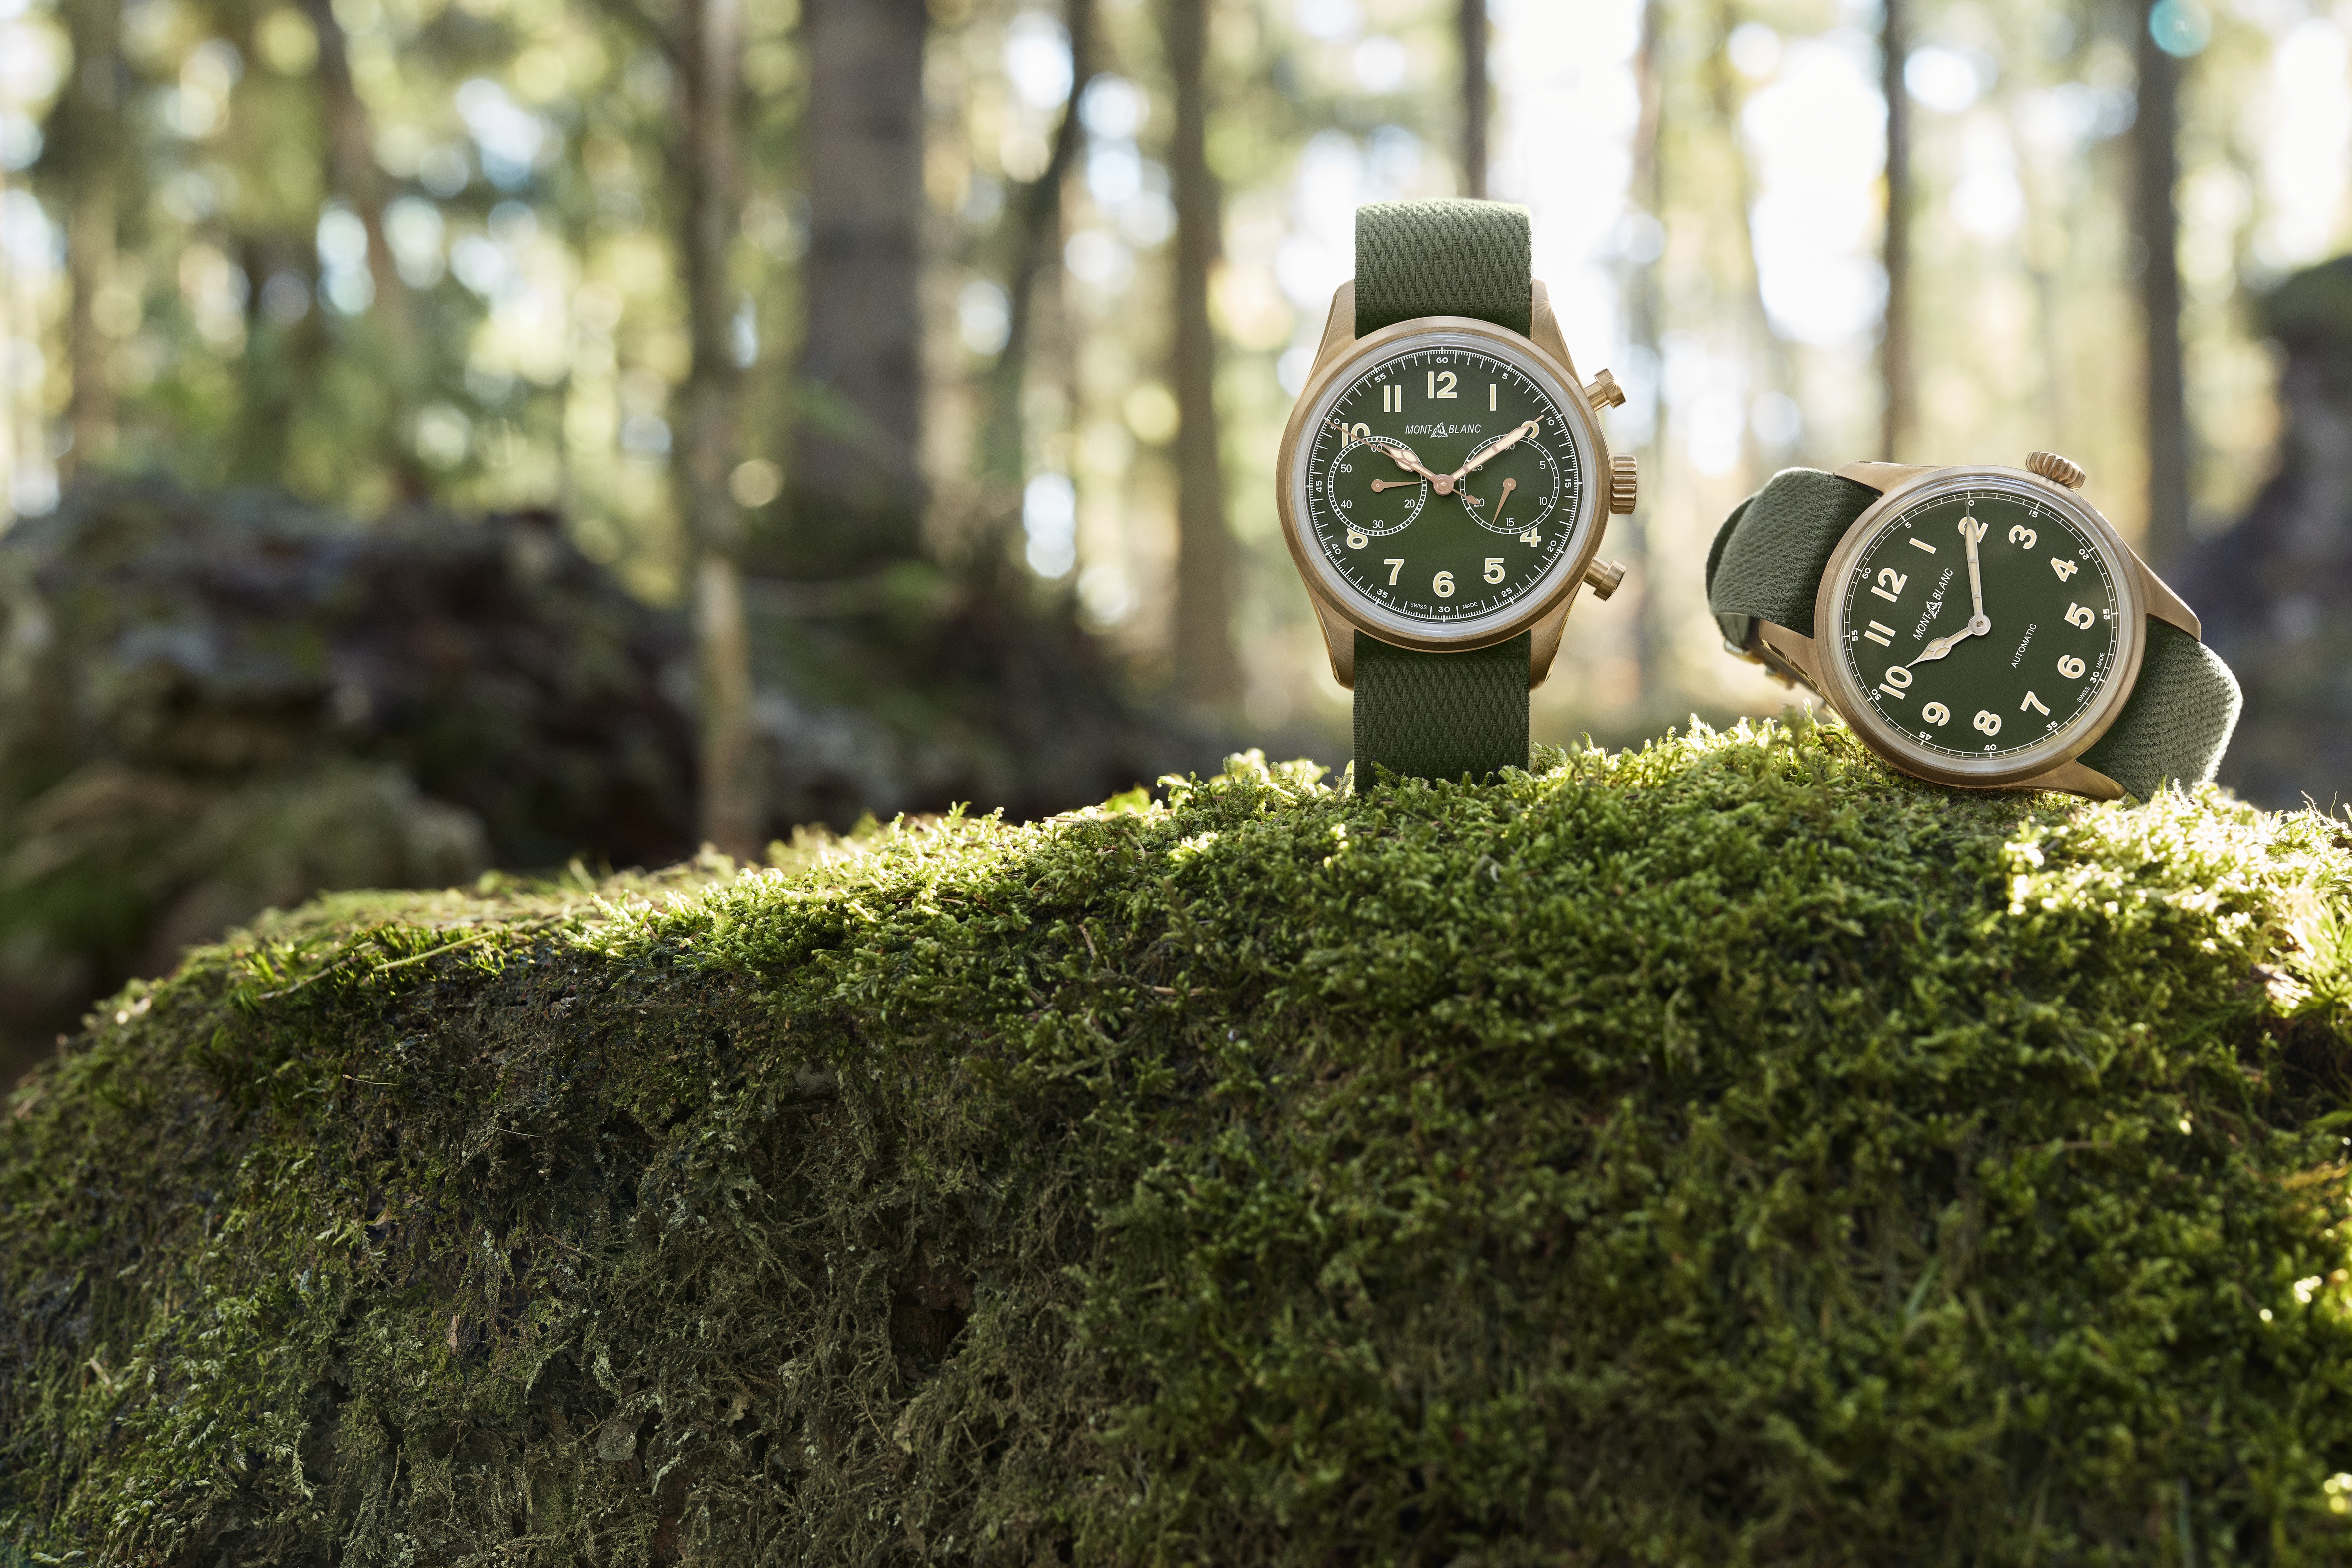 Montblanc’s new 1858 timepieces feature bronze cases paired with green dials.